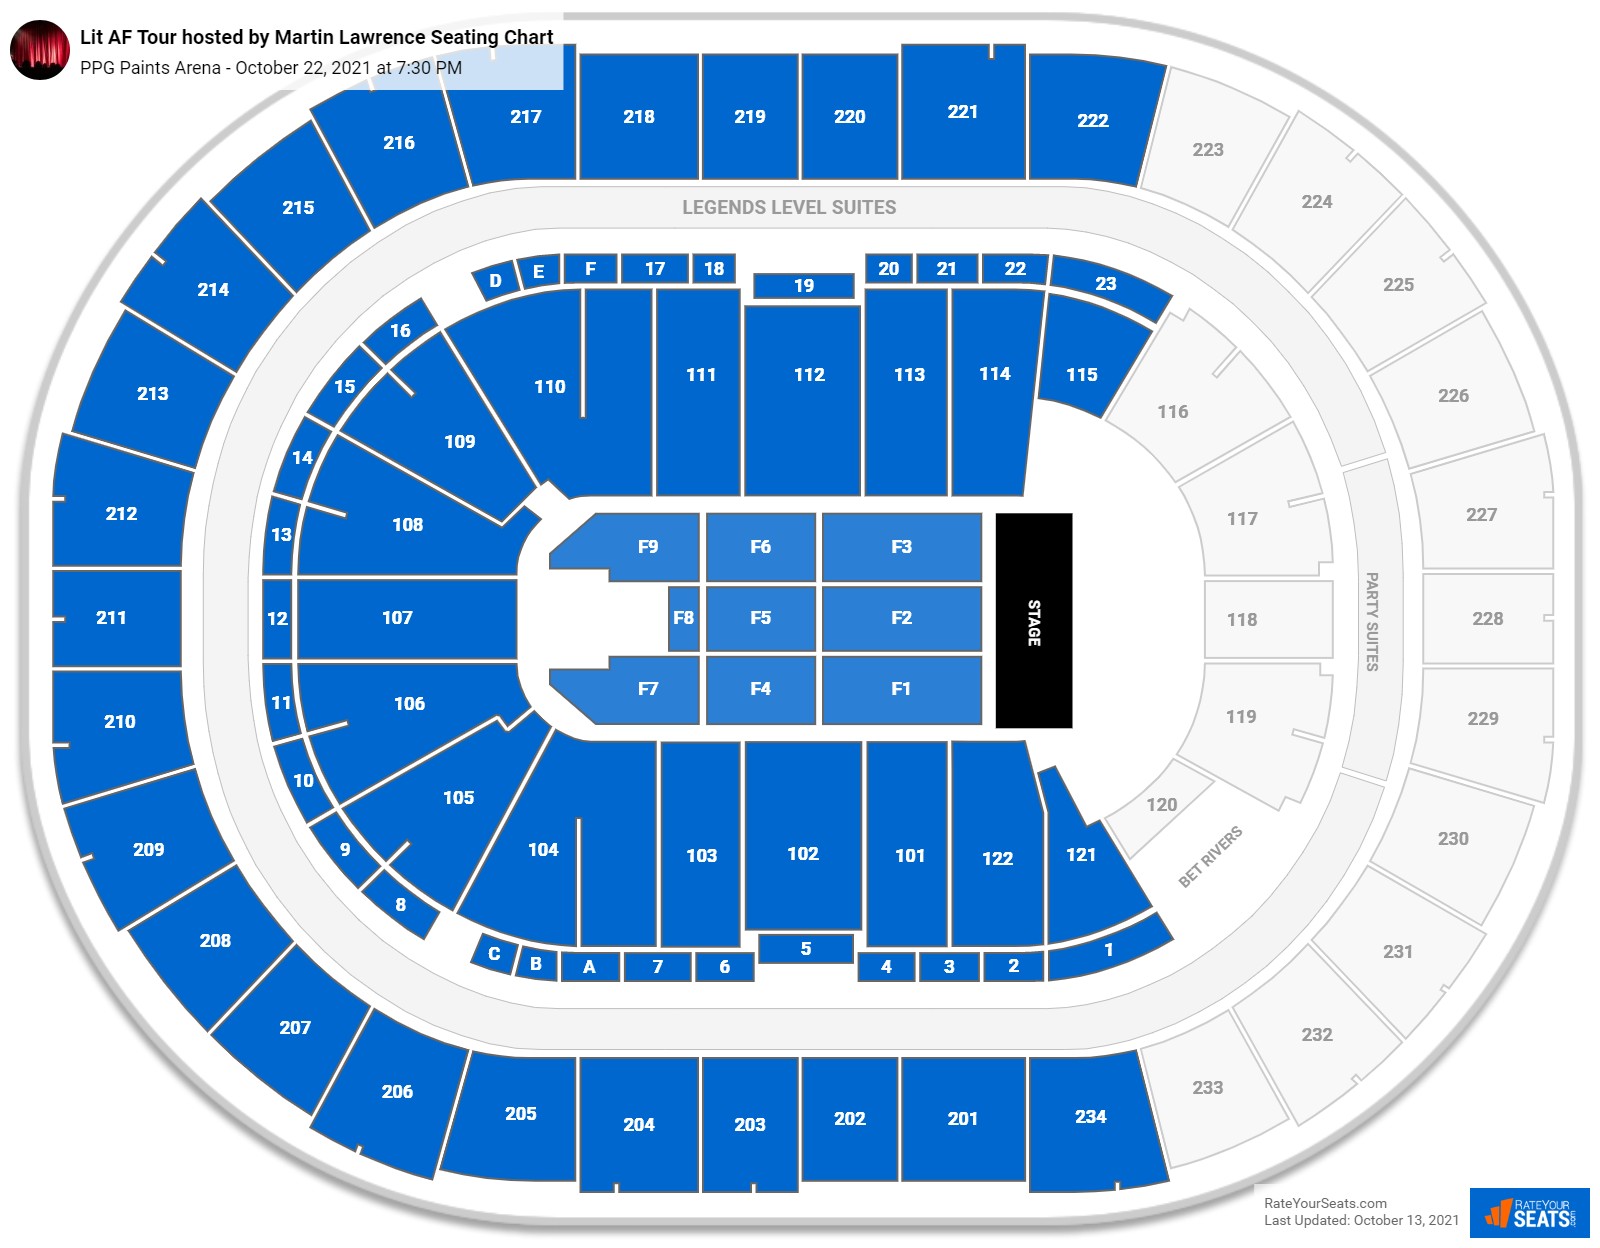 PPG Paints Arena Seating Charts for Concerts